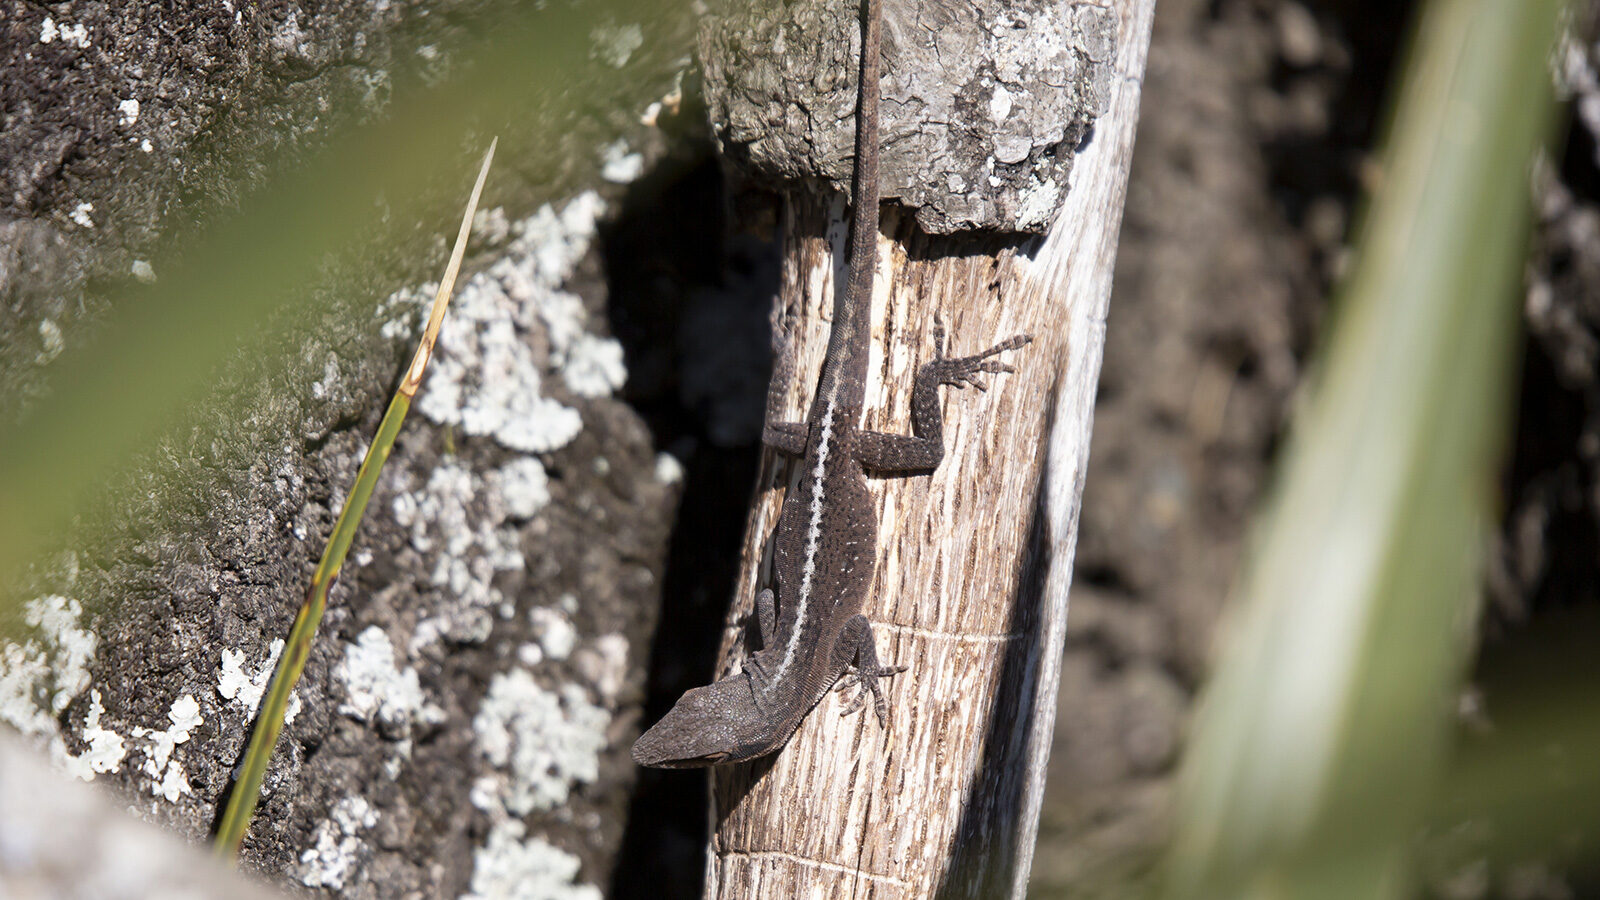 Green anole brown phase climbing on a tree trunk